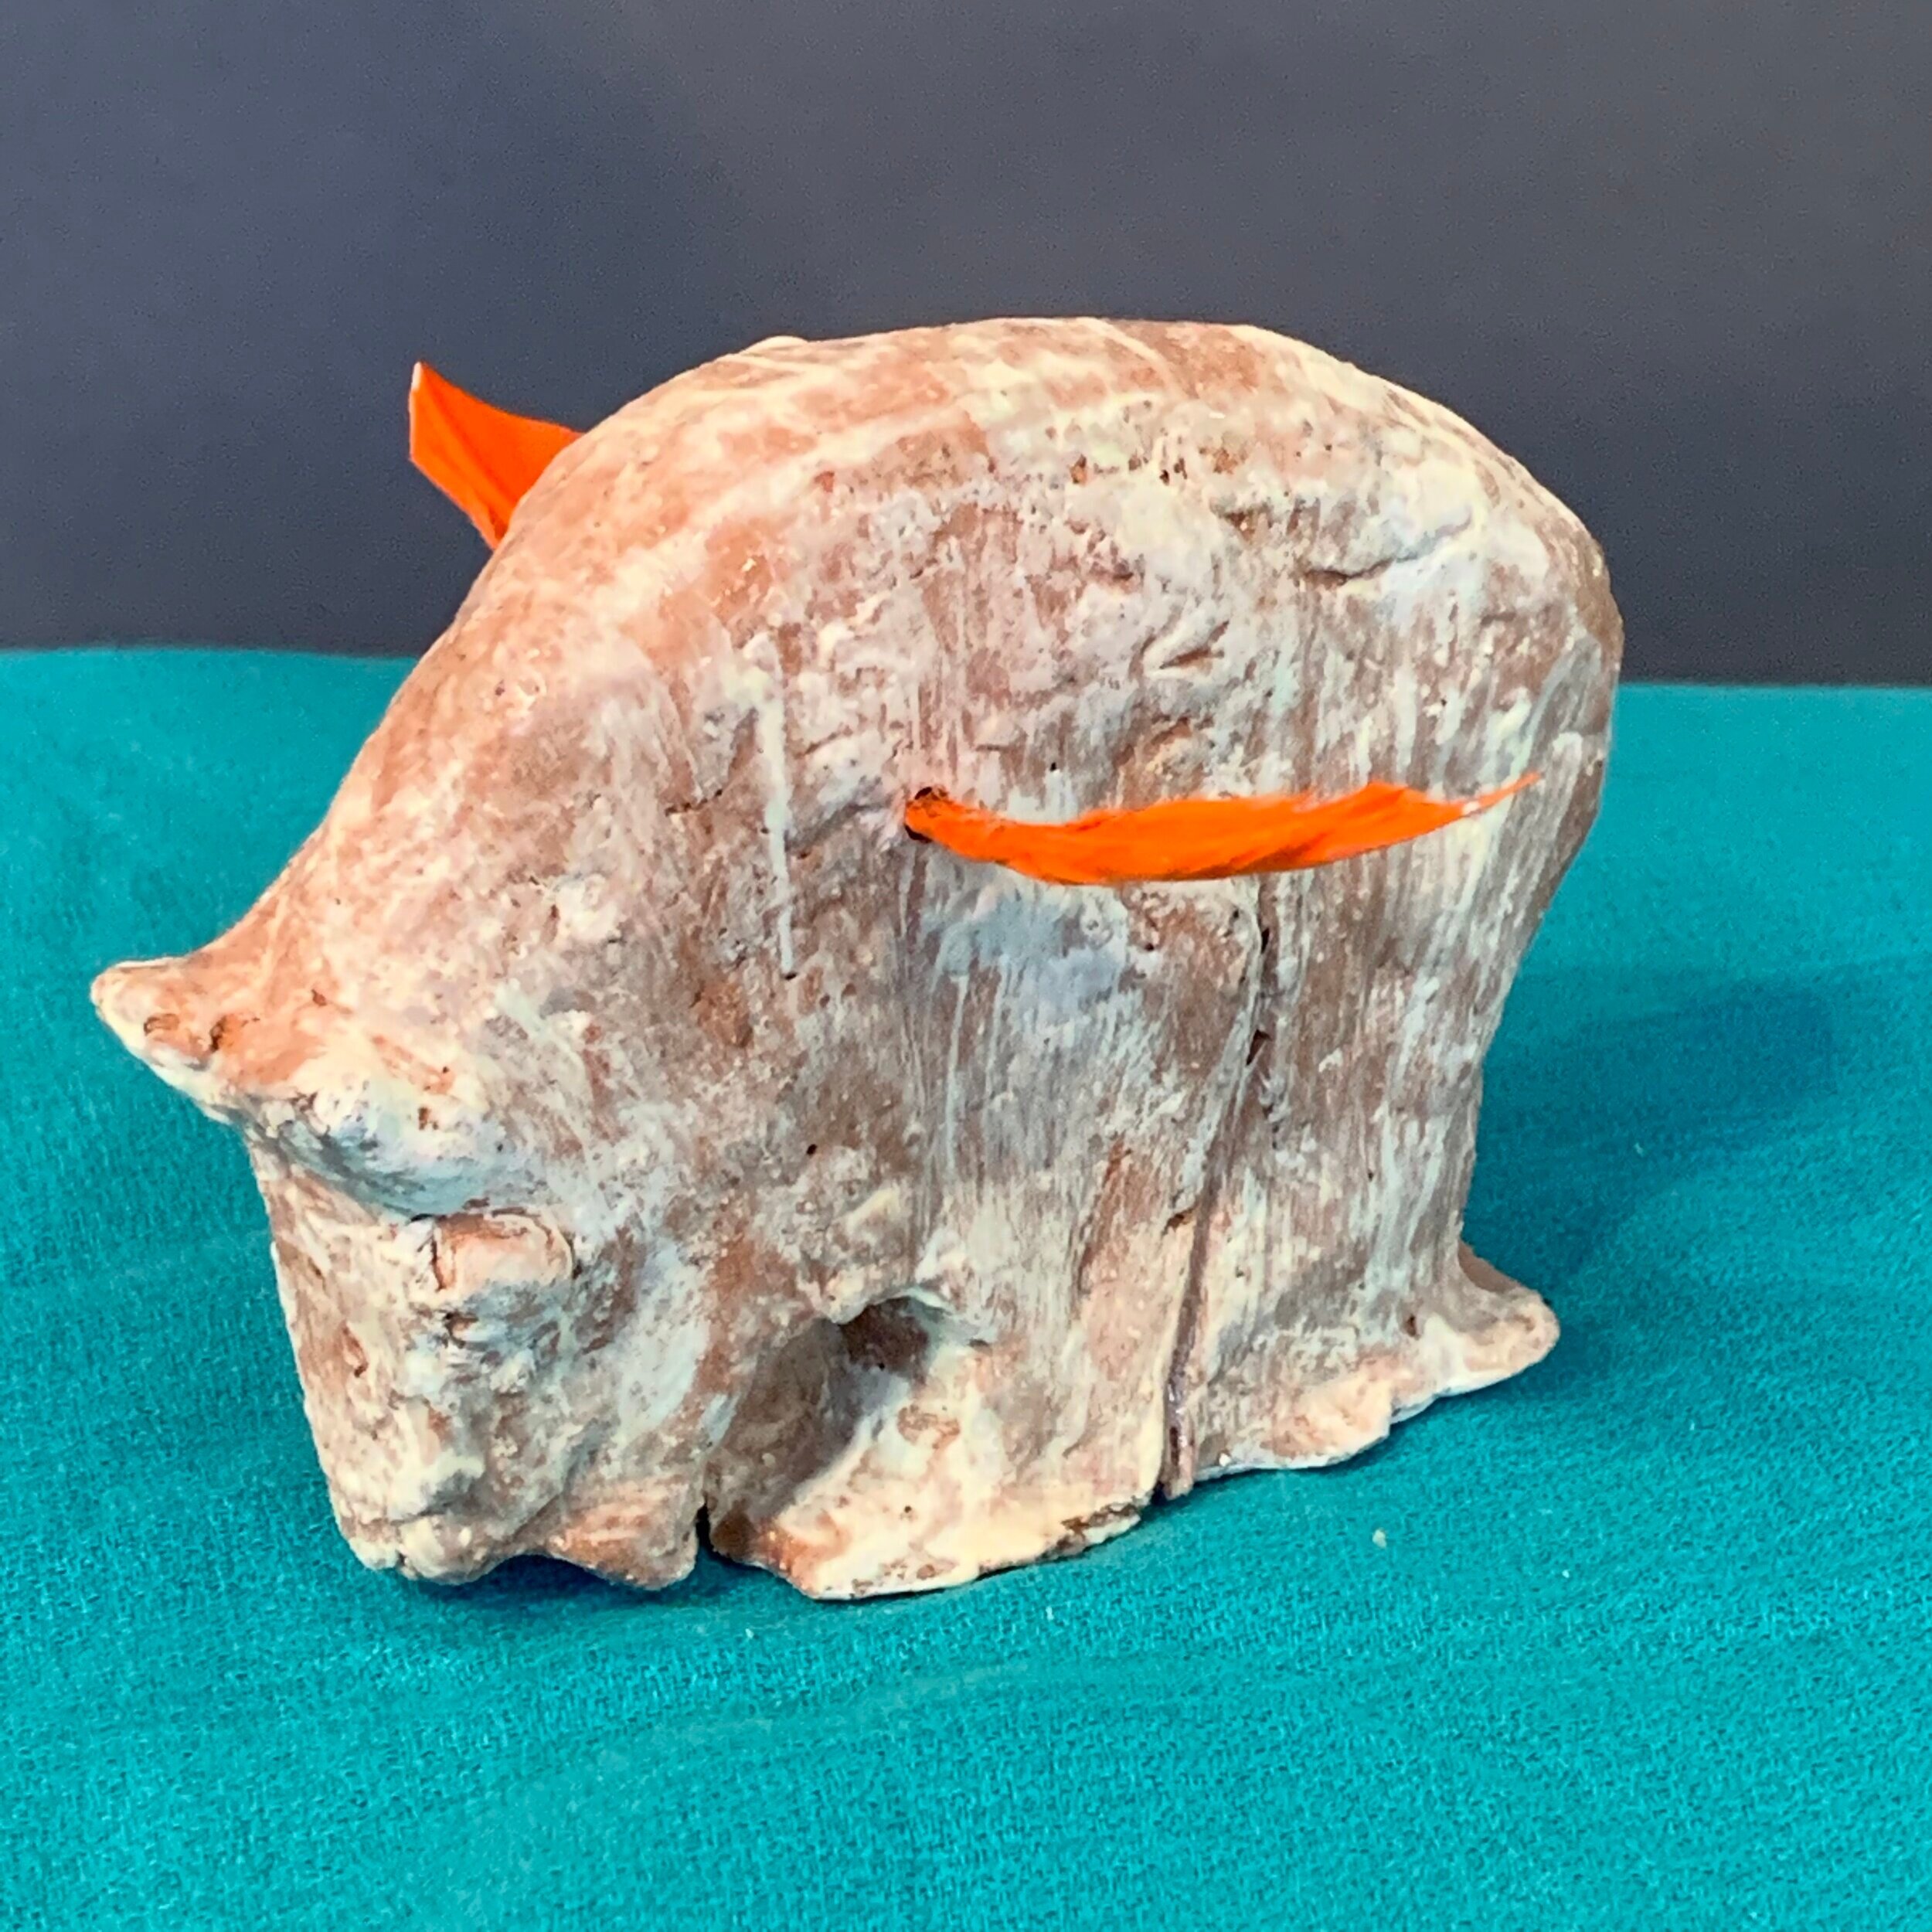   Bear, Spirit Animal Series  Clay and glaze with feathers 5 x 3.5 x 5 in/12.7 x 8.8x 1.7 cm. 2020   